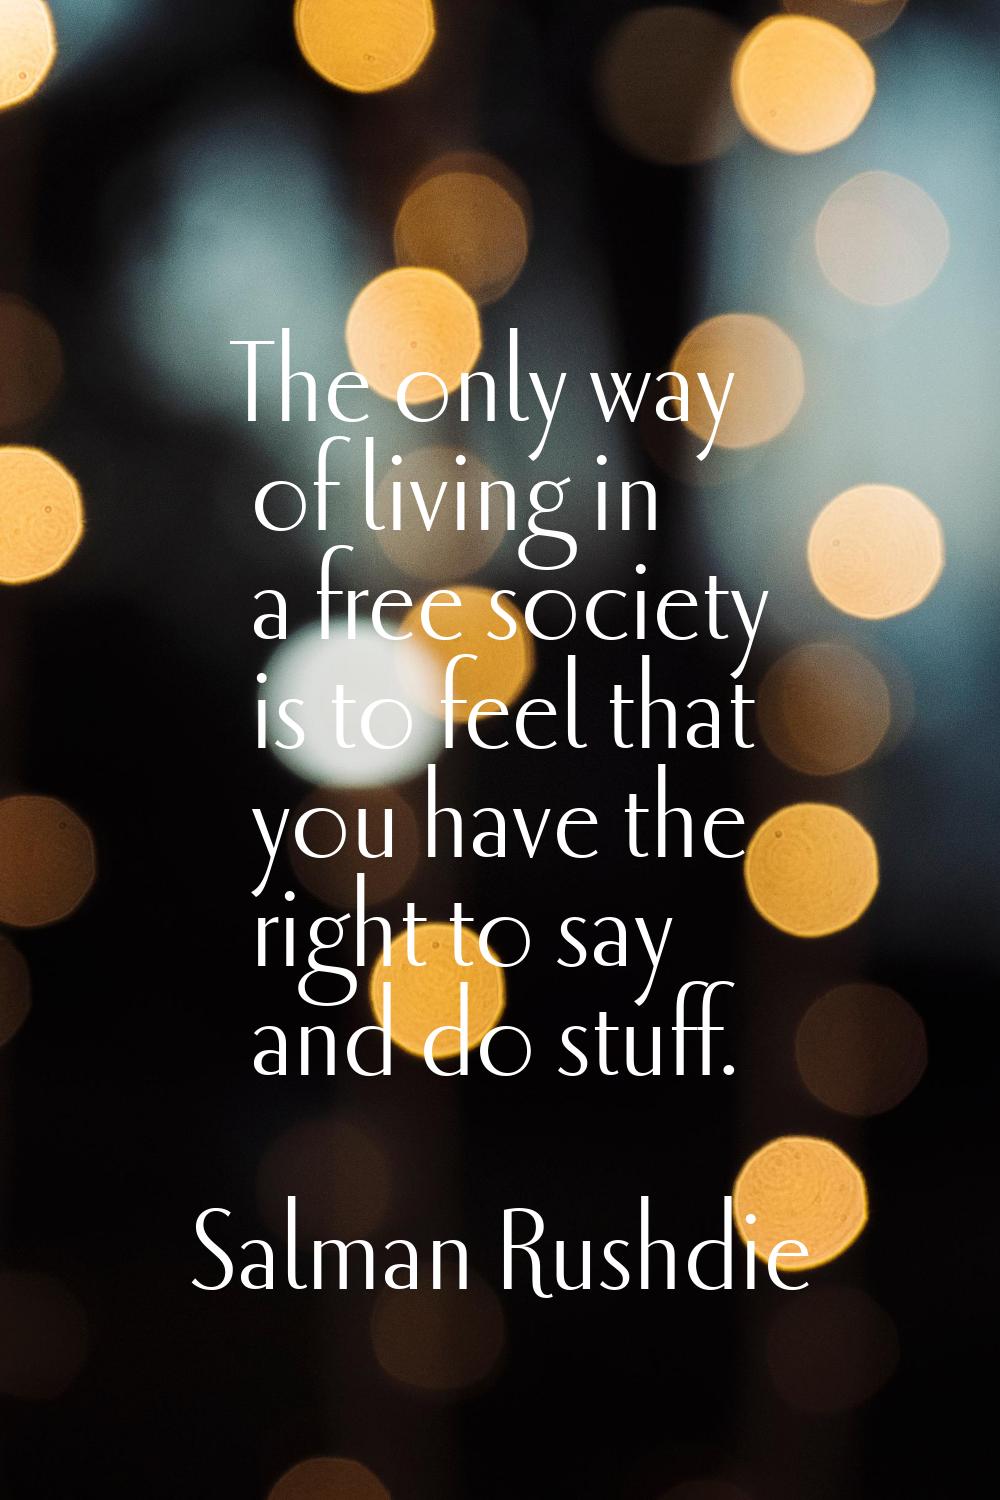 The only way of living in a free society is to feel that you have the right to say and do stuff.